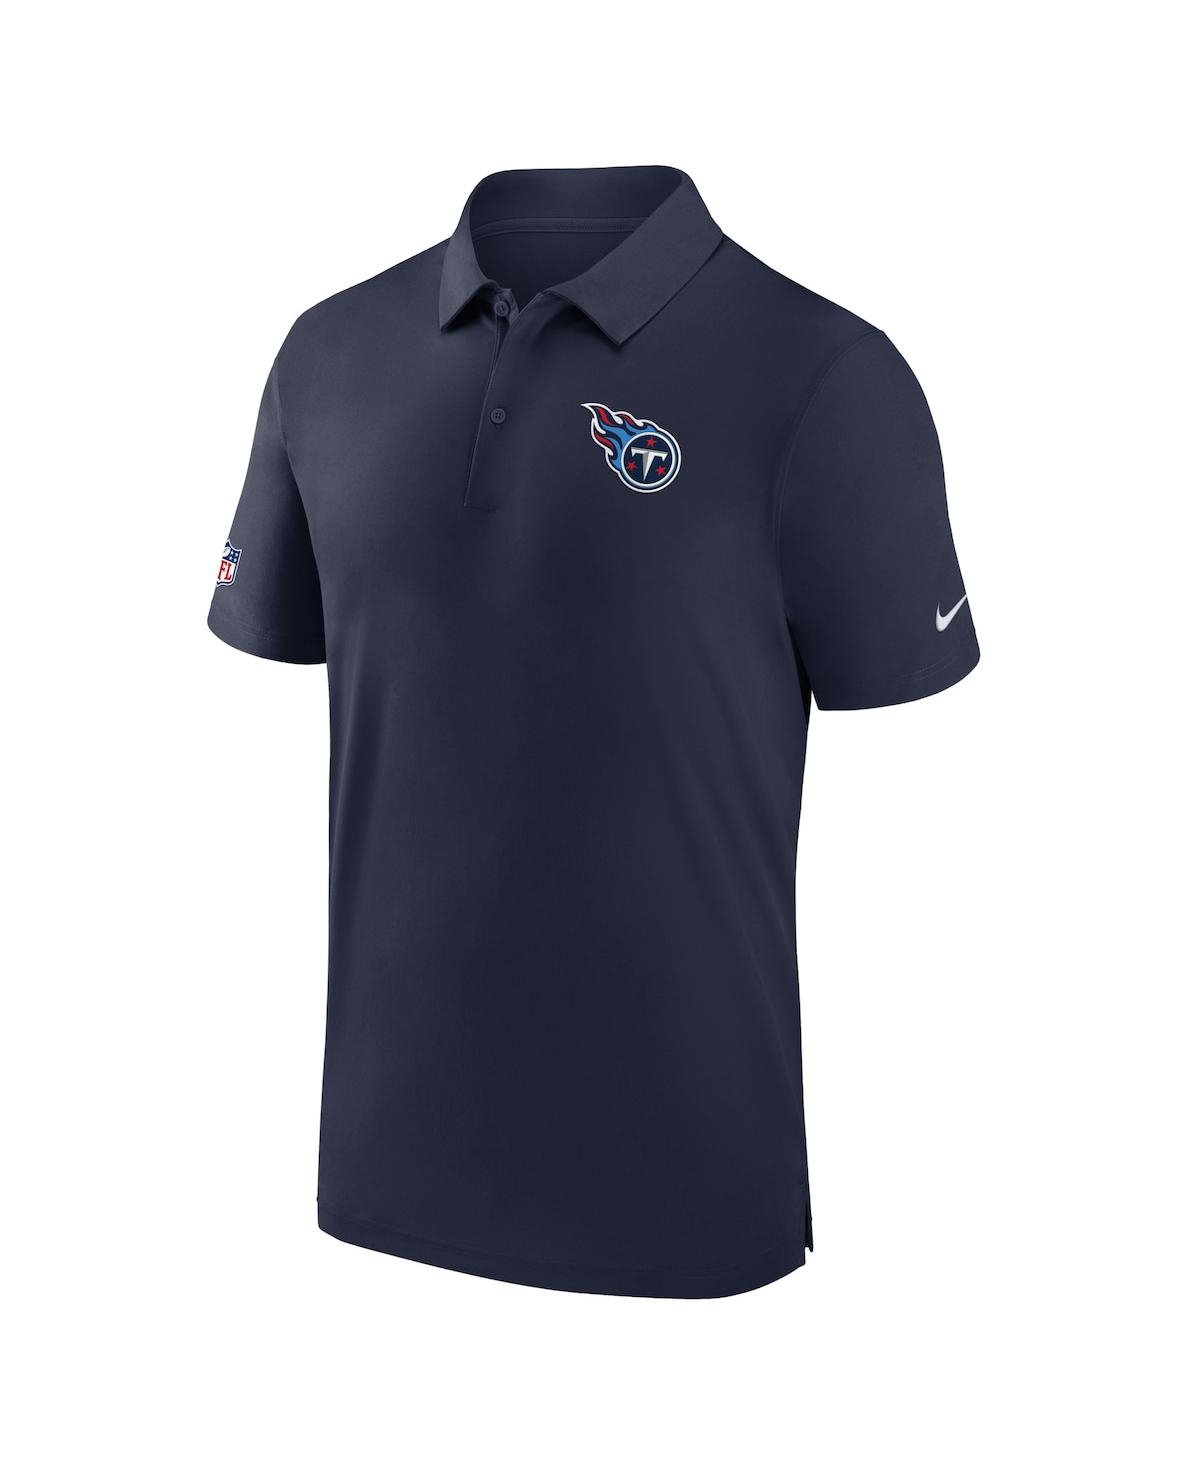 Shop Nike Men's  Navy Tennessee Titans Sideline Coaches Performance Polo Shirt